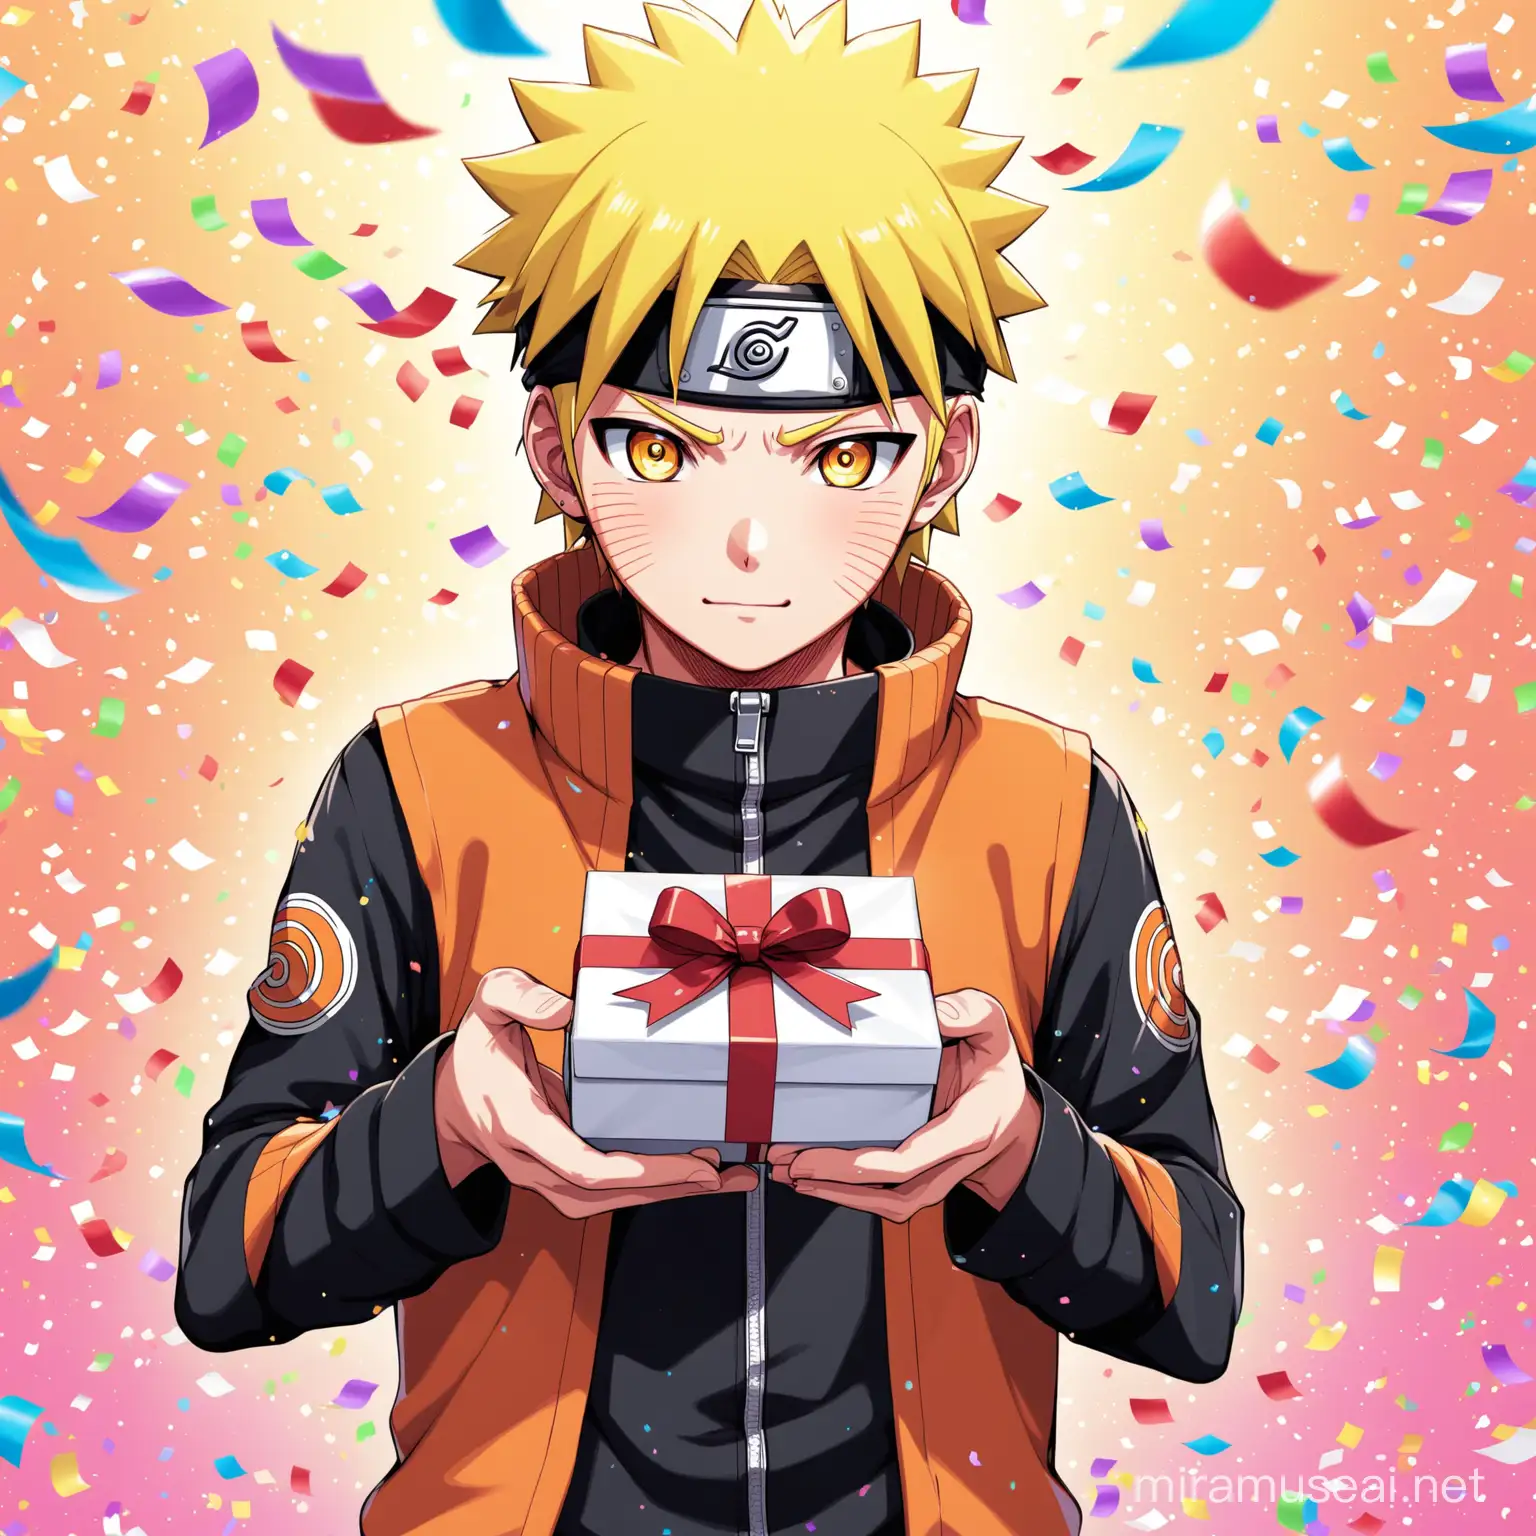 Naruto Holding a Present Surrounded by Confetti Celebration